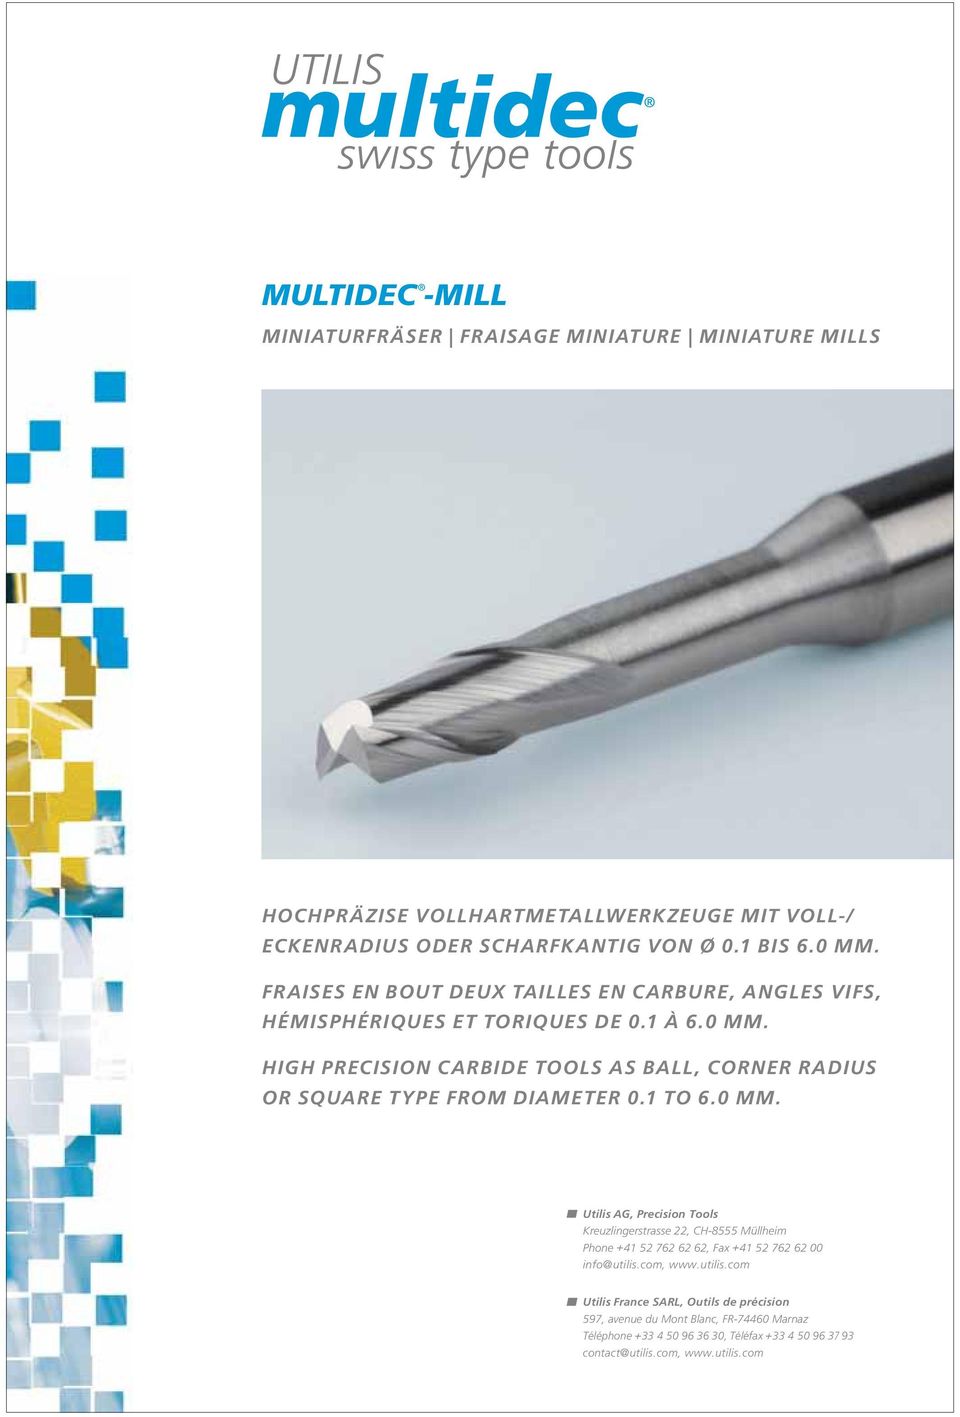 HIGH PRECISION CARBIDE TOOLS AS BALL, CORNER RADIUS OR SQUARE TYPE FROM DIAMETER 0.1 TO 6.0 MM.